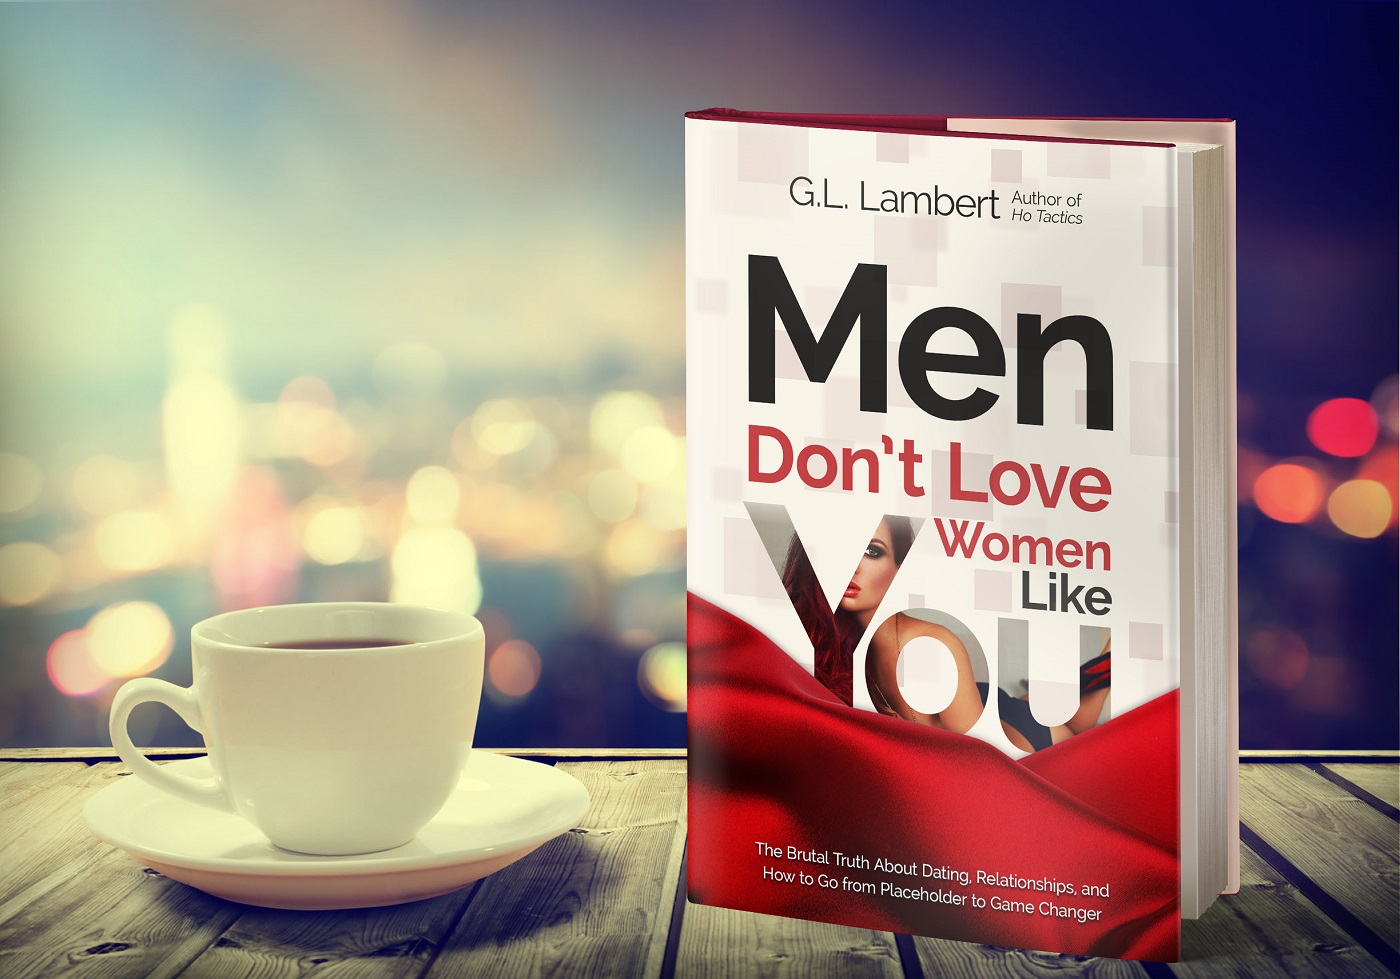 The author new book. Ламберт в книге. Love like you. Smartdeal книга. Books about relationship.